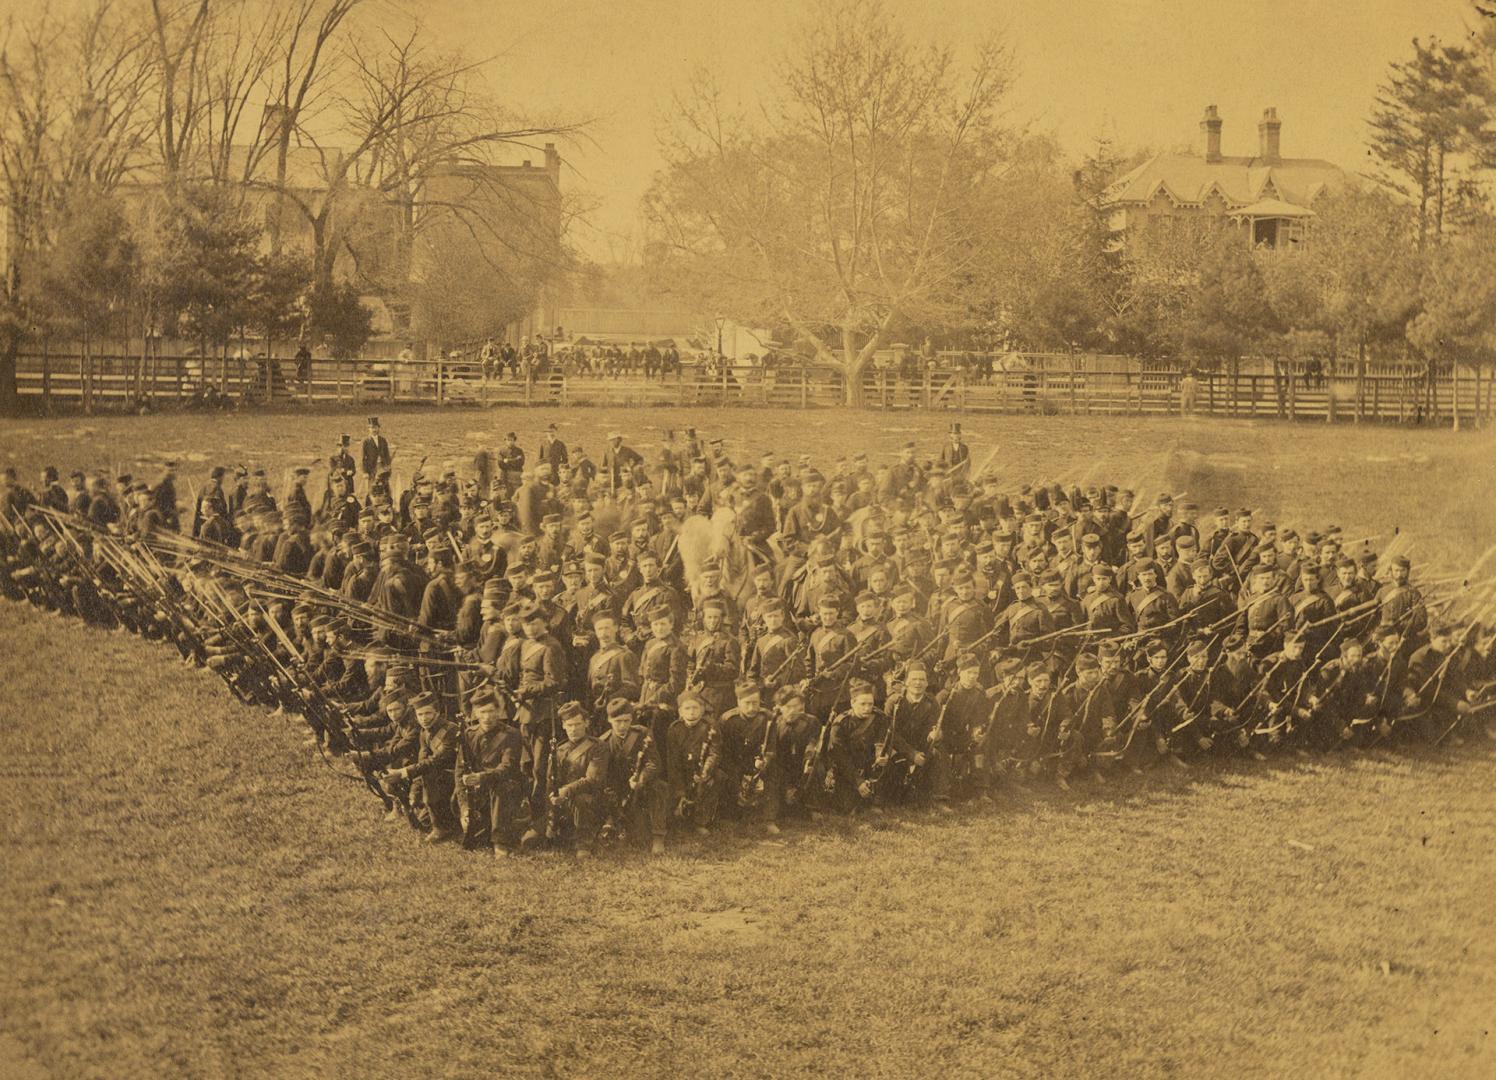 Queen's Own Rifles, in battle square formation, perhaps in grounds of Normal School, Toronto, Ontario